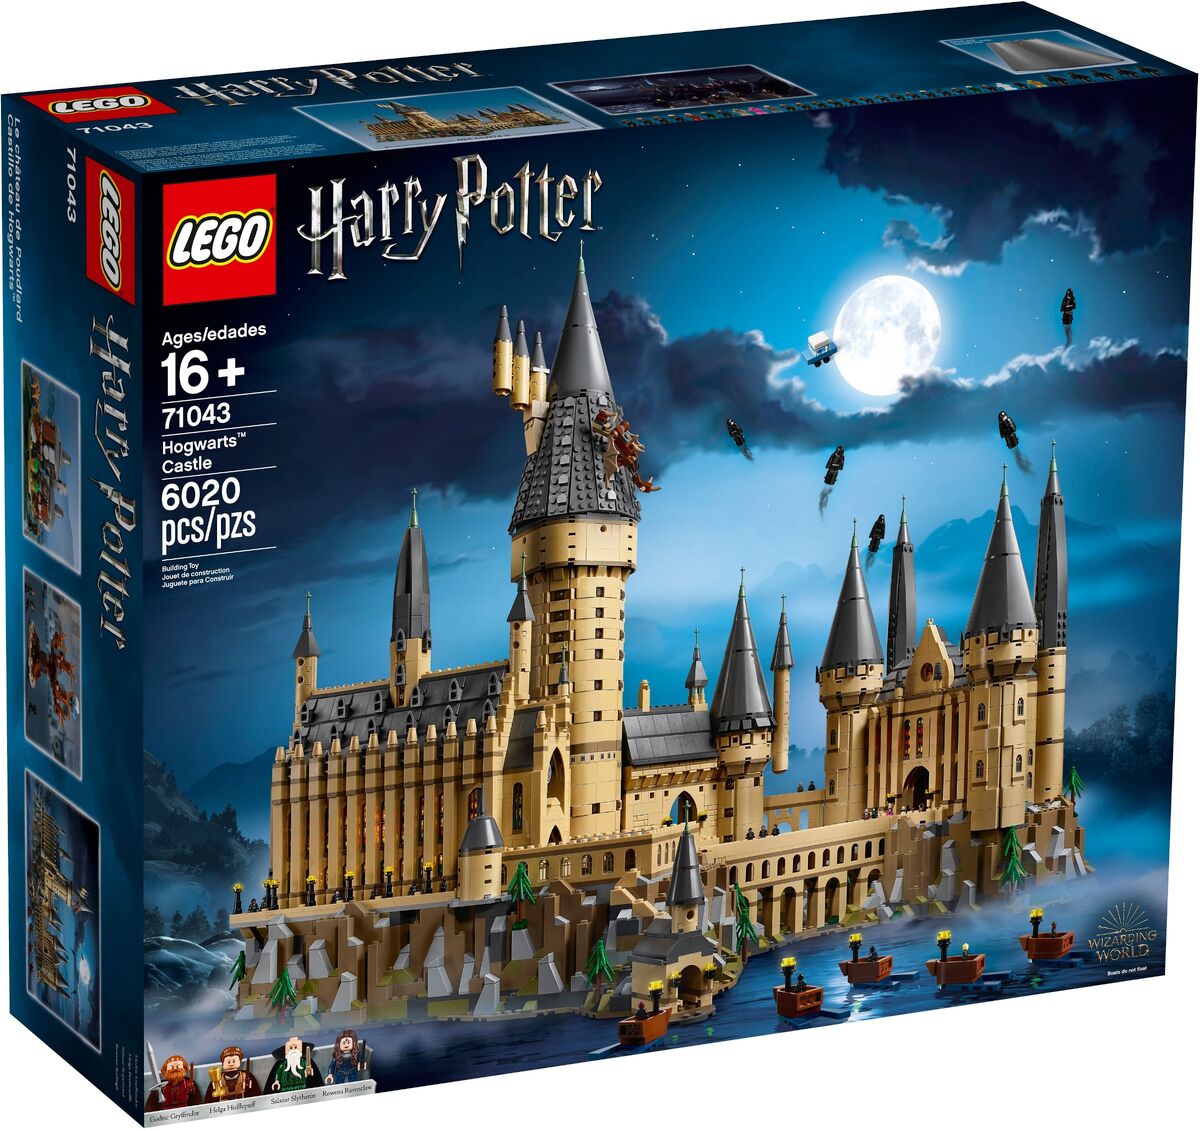 LEGO 4730 Chamber of Secrets Set Parts Inventory and Instructions